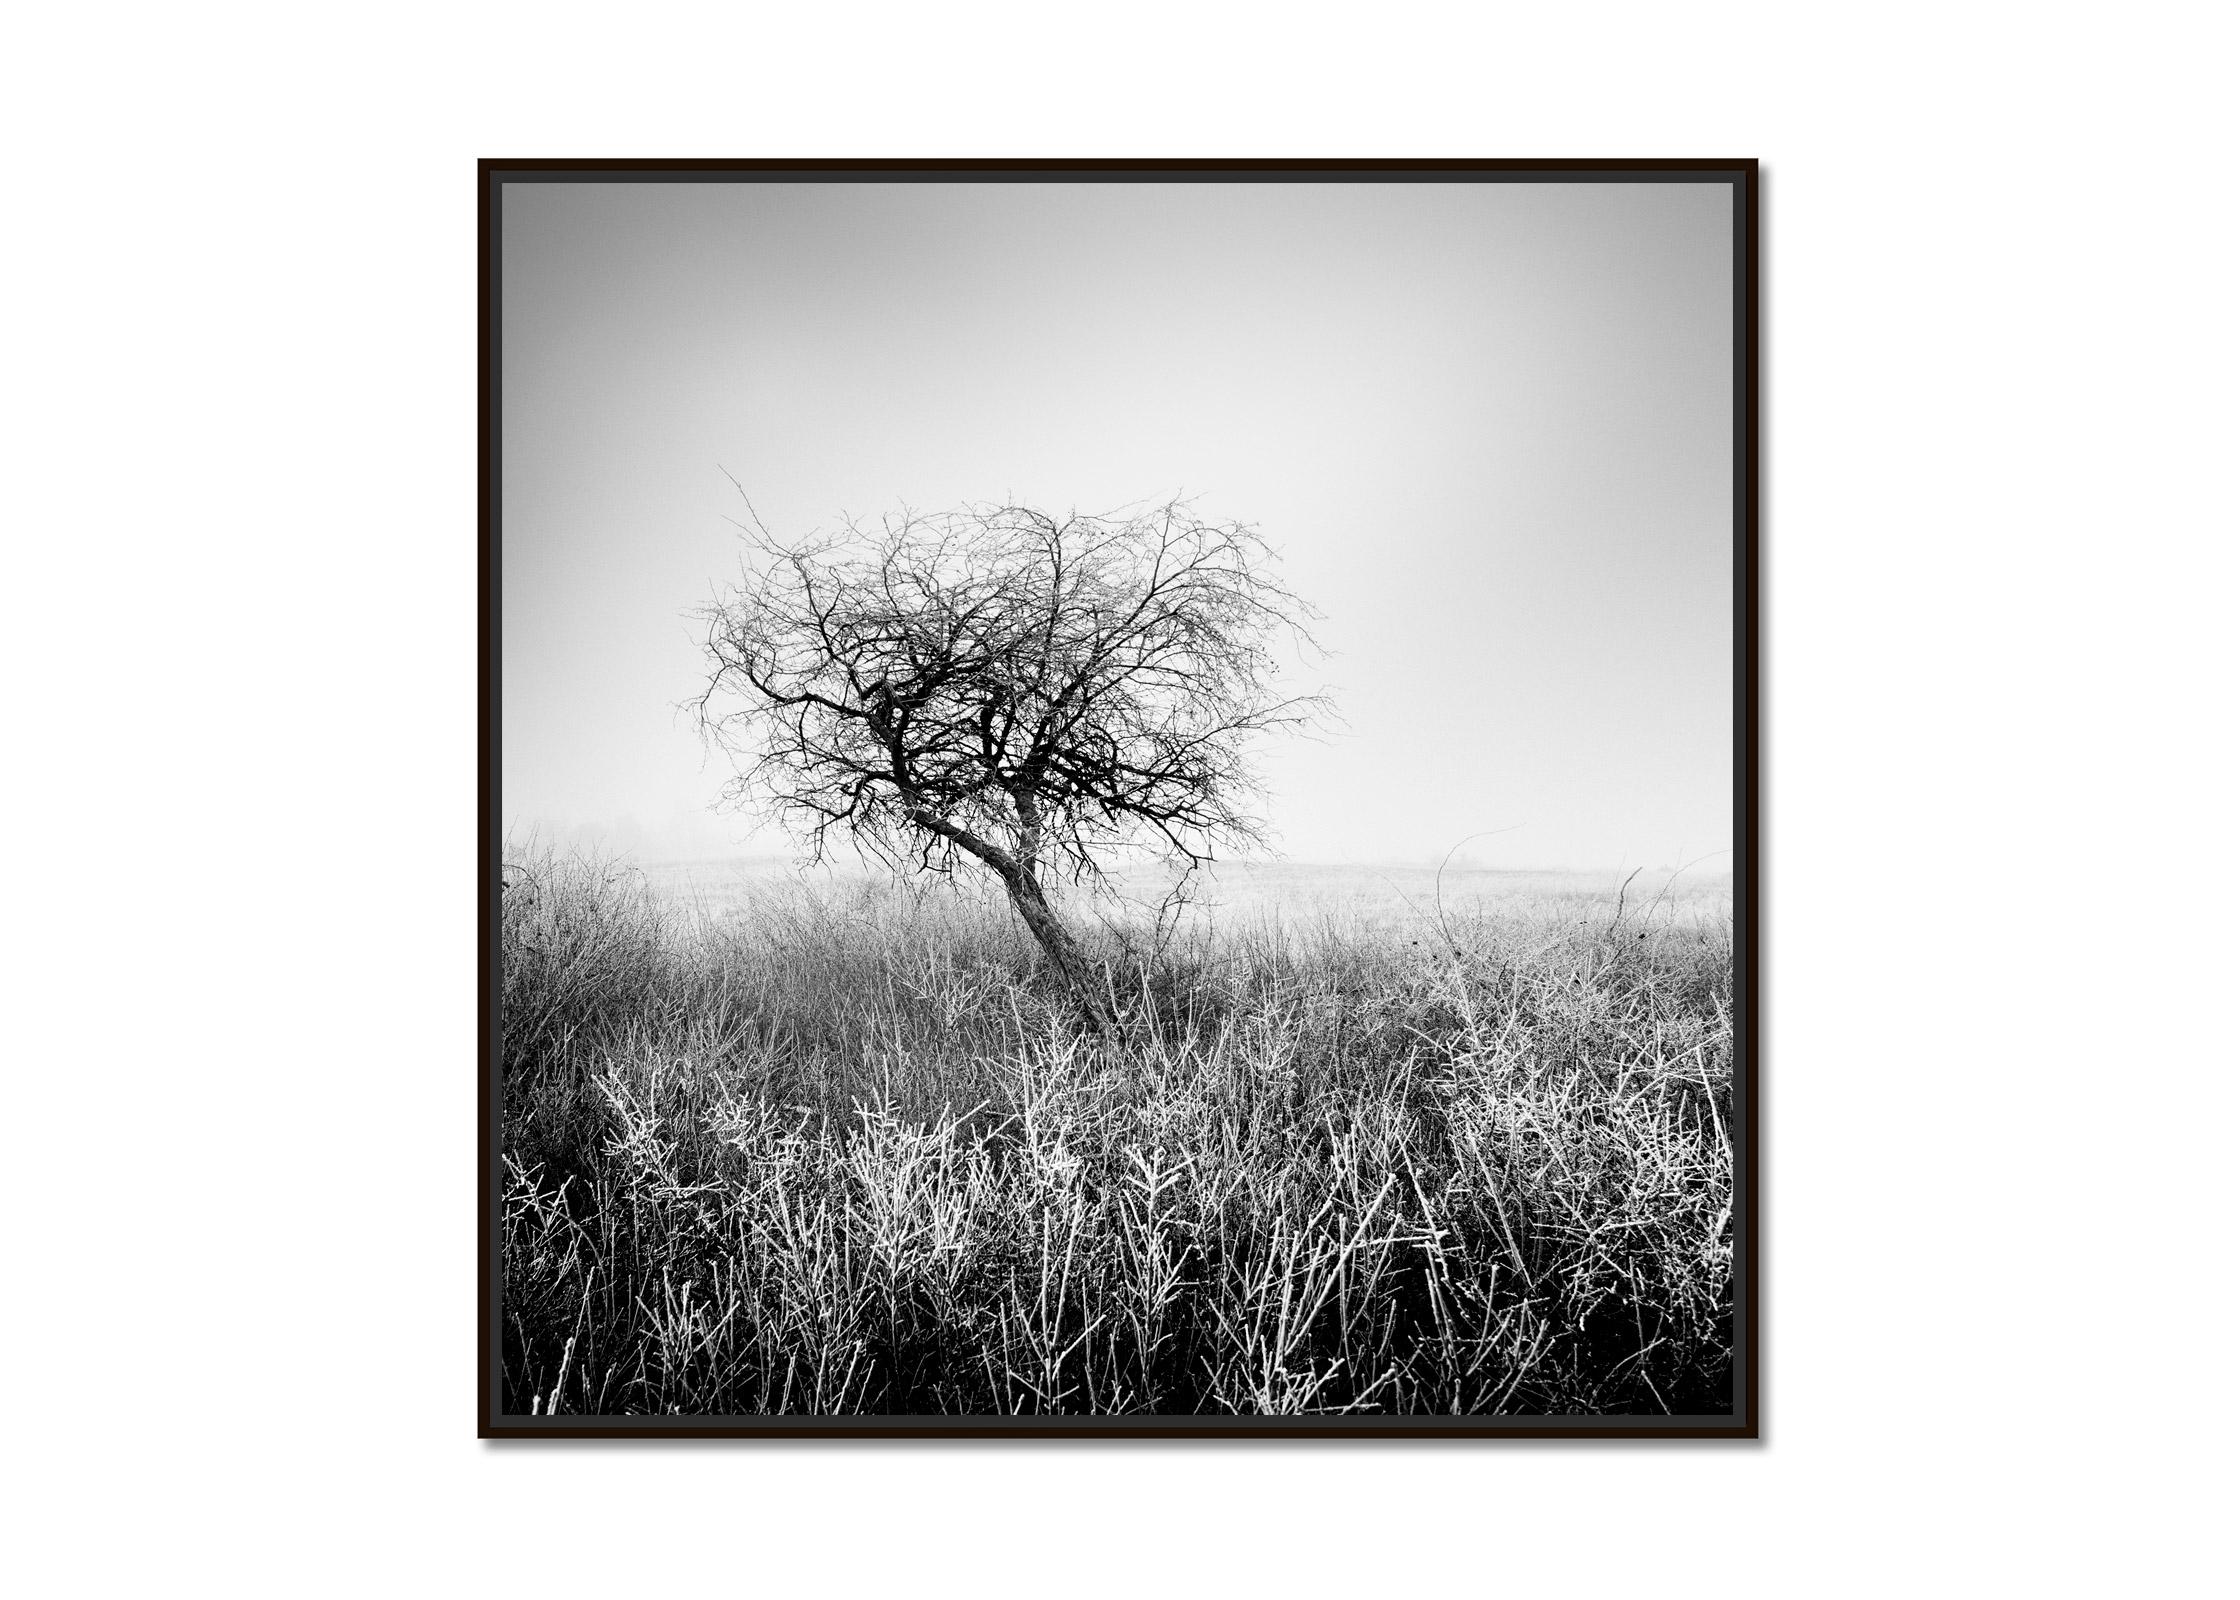 Tree in hoarfrost, frozen, Hungary, black and white art landscape photography  - Photograph by Gerald Berghammer